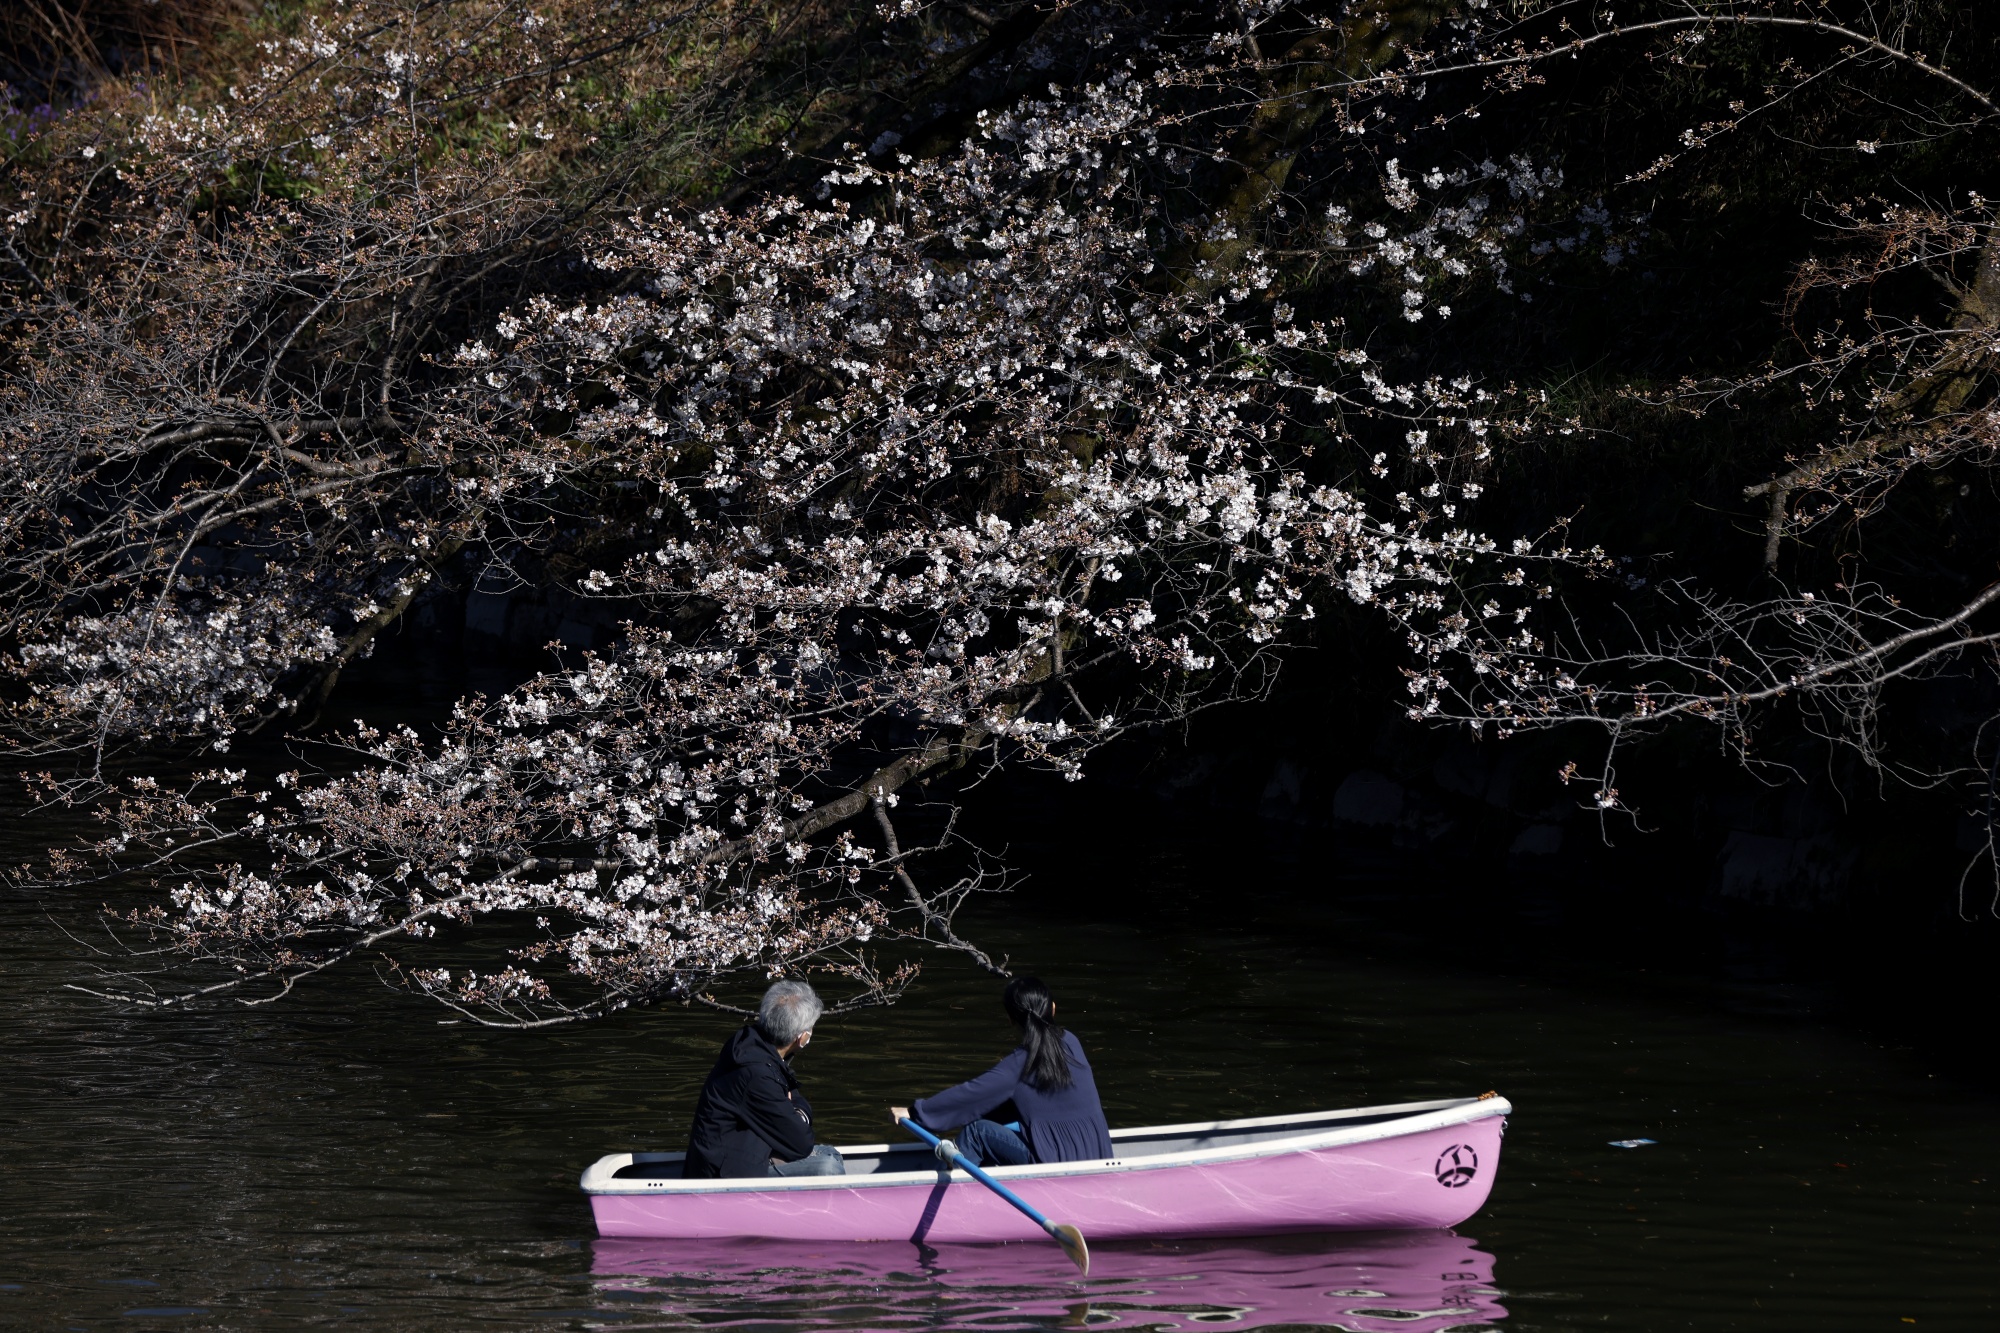 Forget Cherry Blossoms — Why Fall May Be the Best Time to Visit Japan, Travel